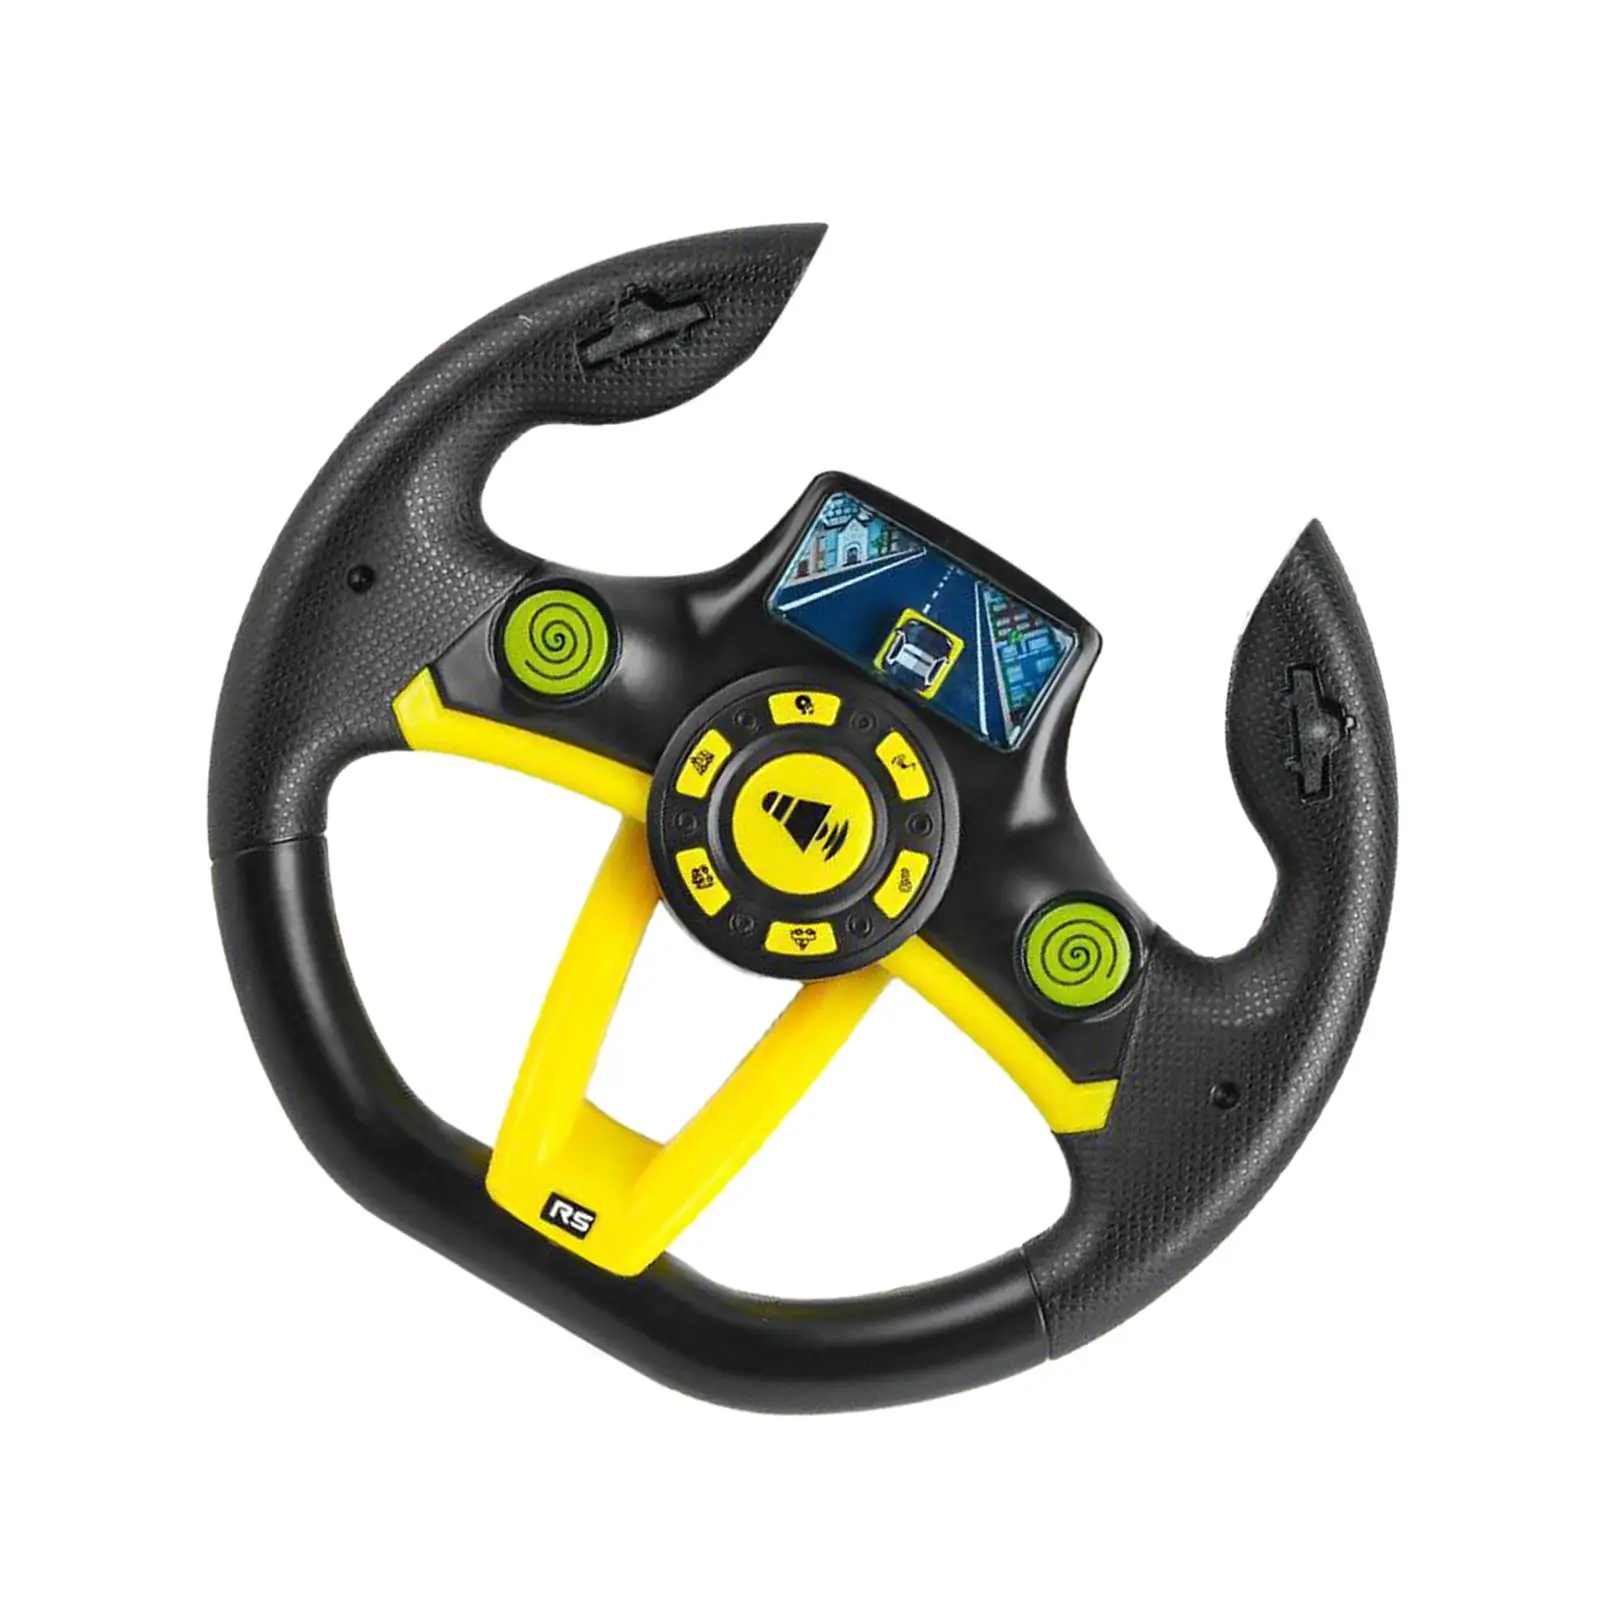 Simulated Steering Wheel Educational Learning Toy Pretend Play Driving Toy for